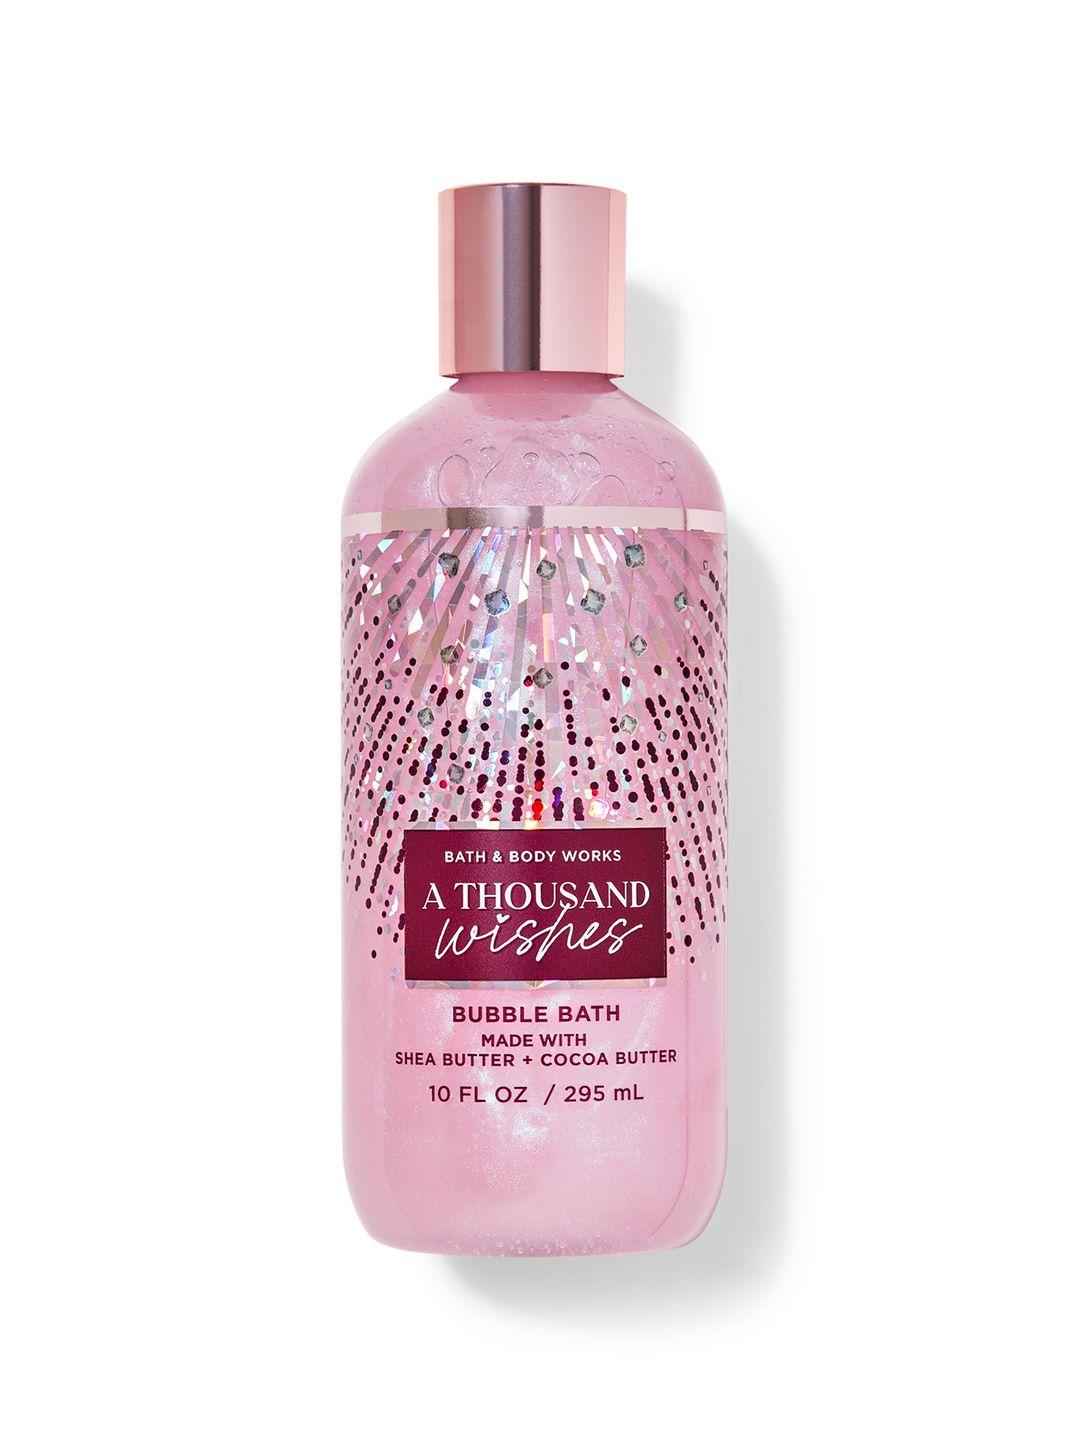 bath & body works a thousand wishes bubble bath with shea butter & cocoa butter - 295ml